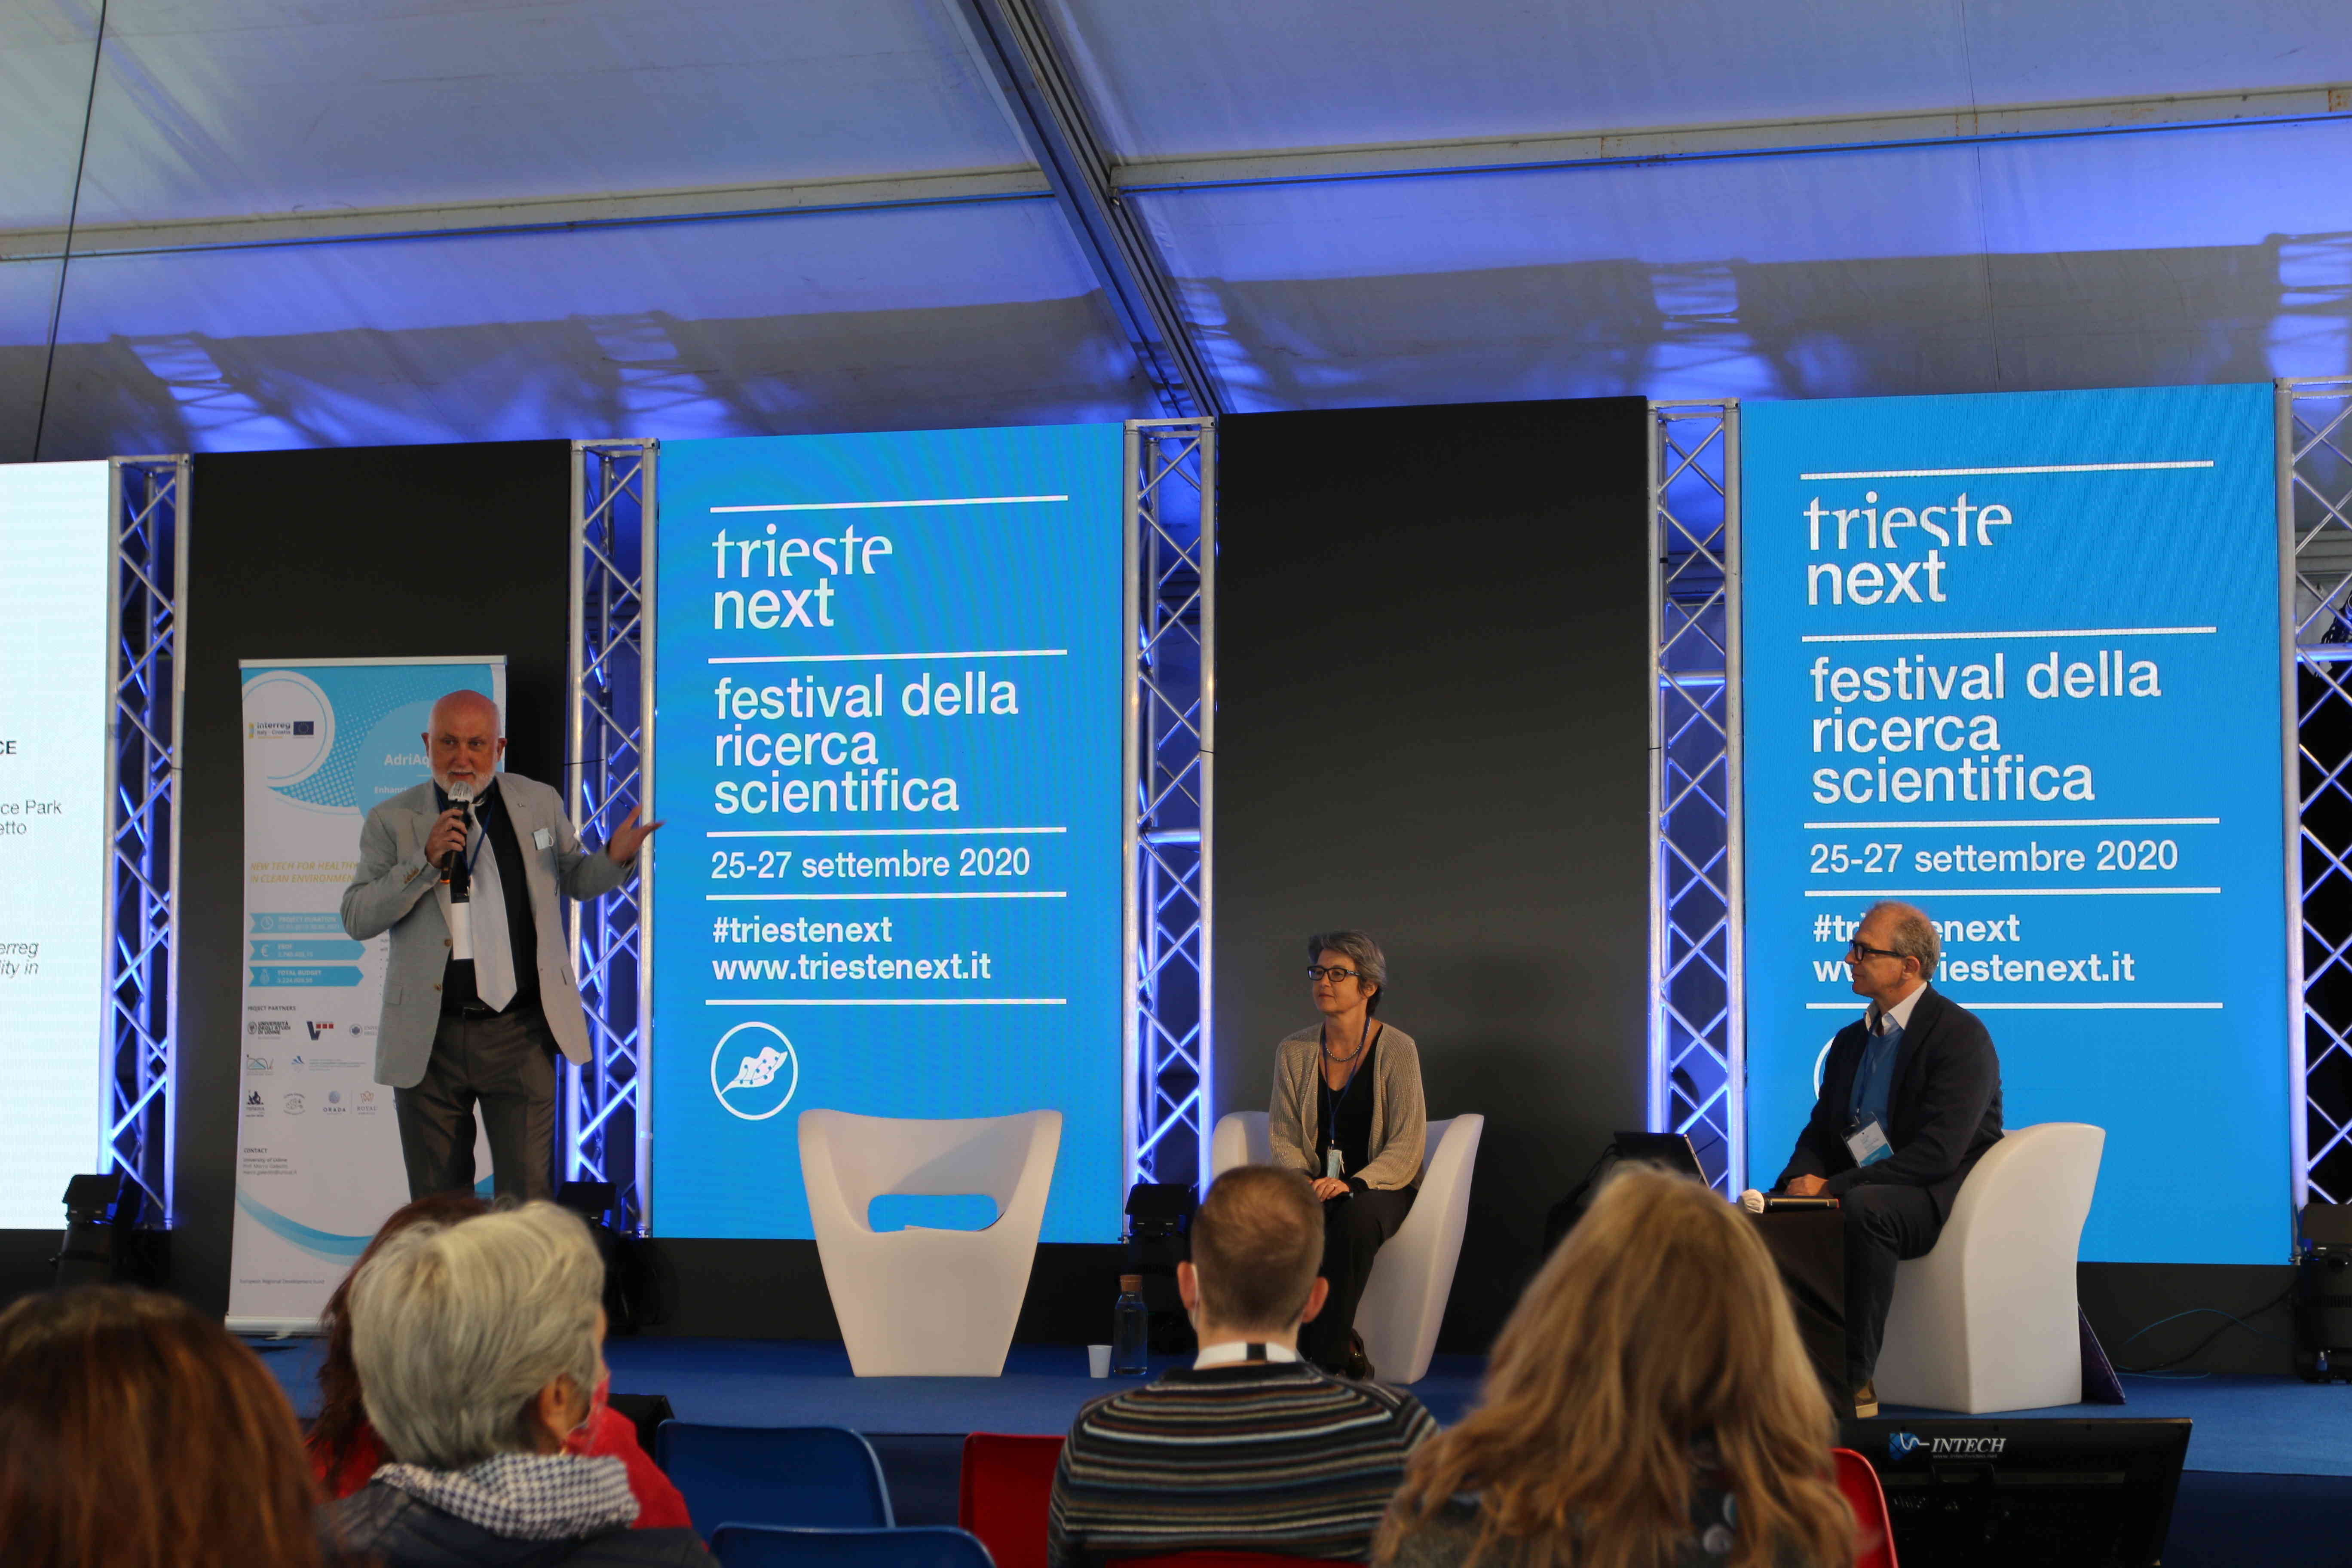 AdriAquaNet - Technologies for the fish farm at Trieste Next 2020